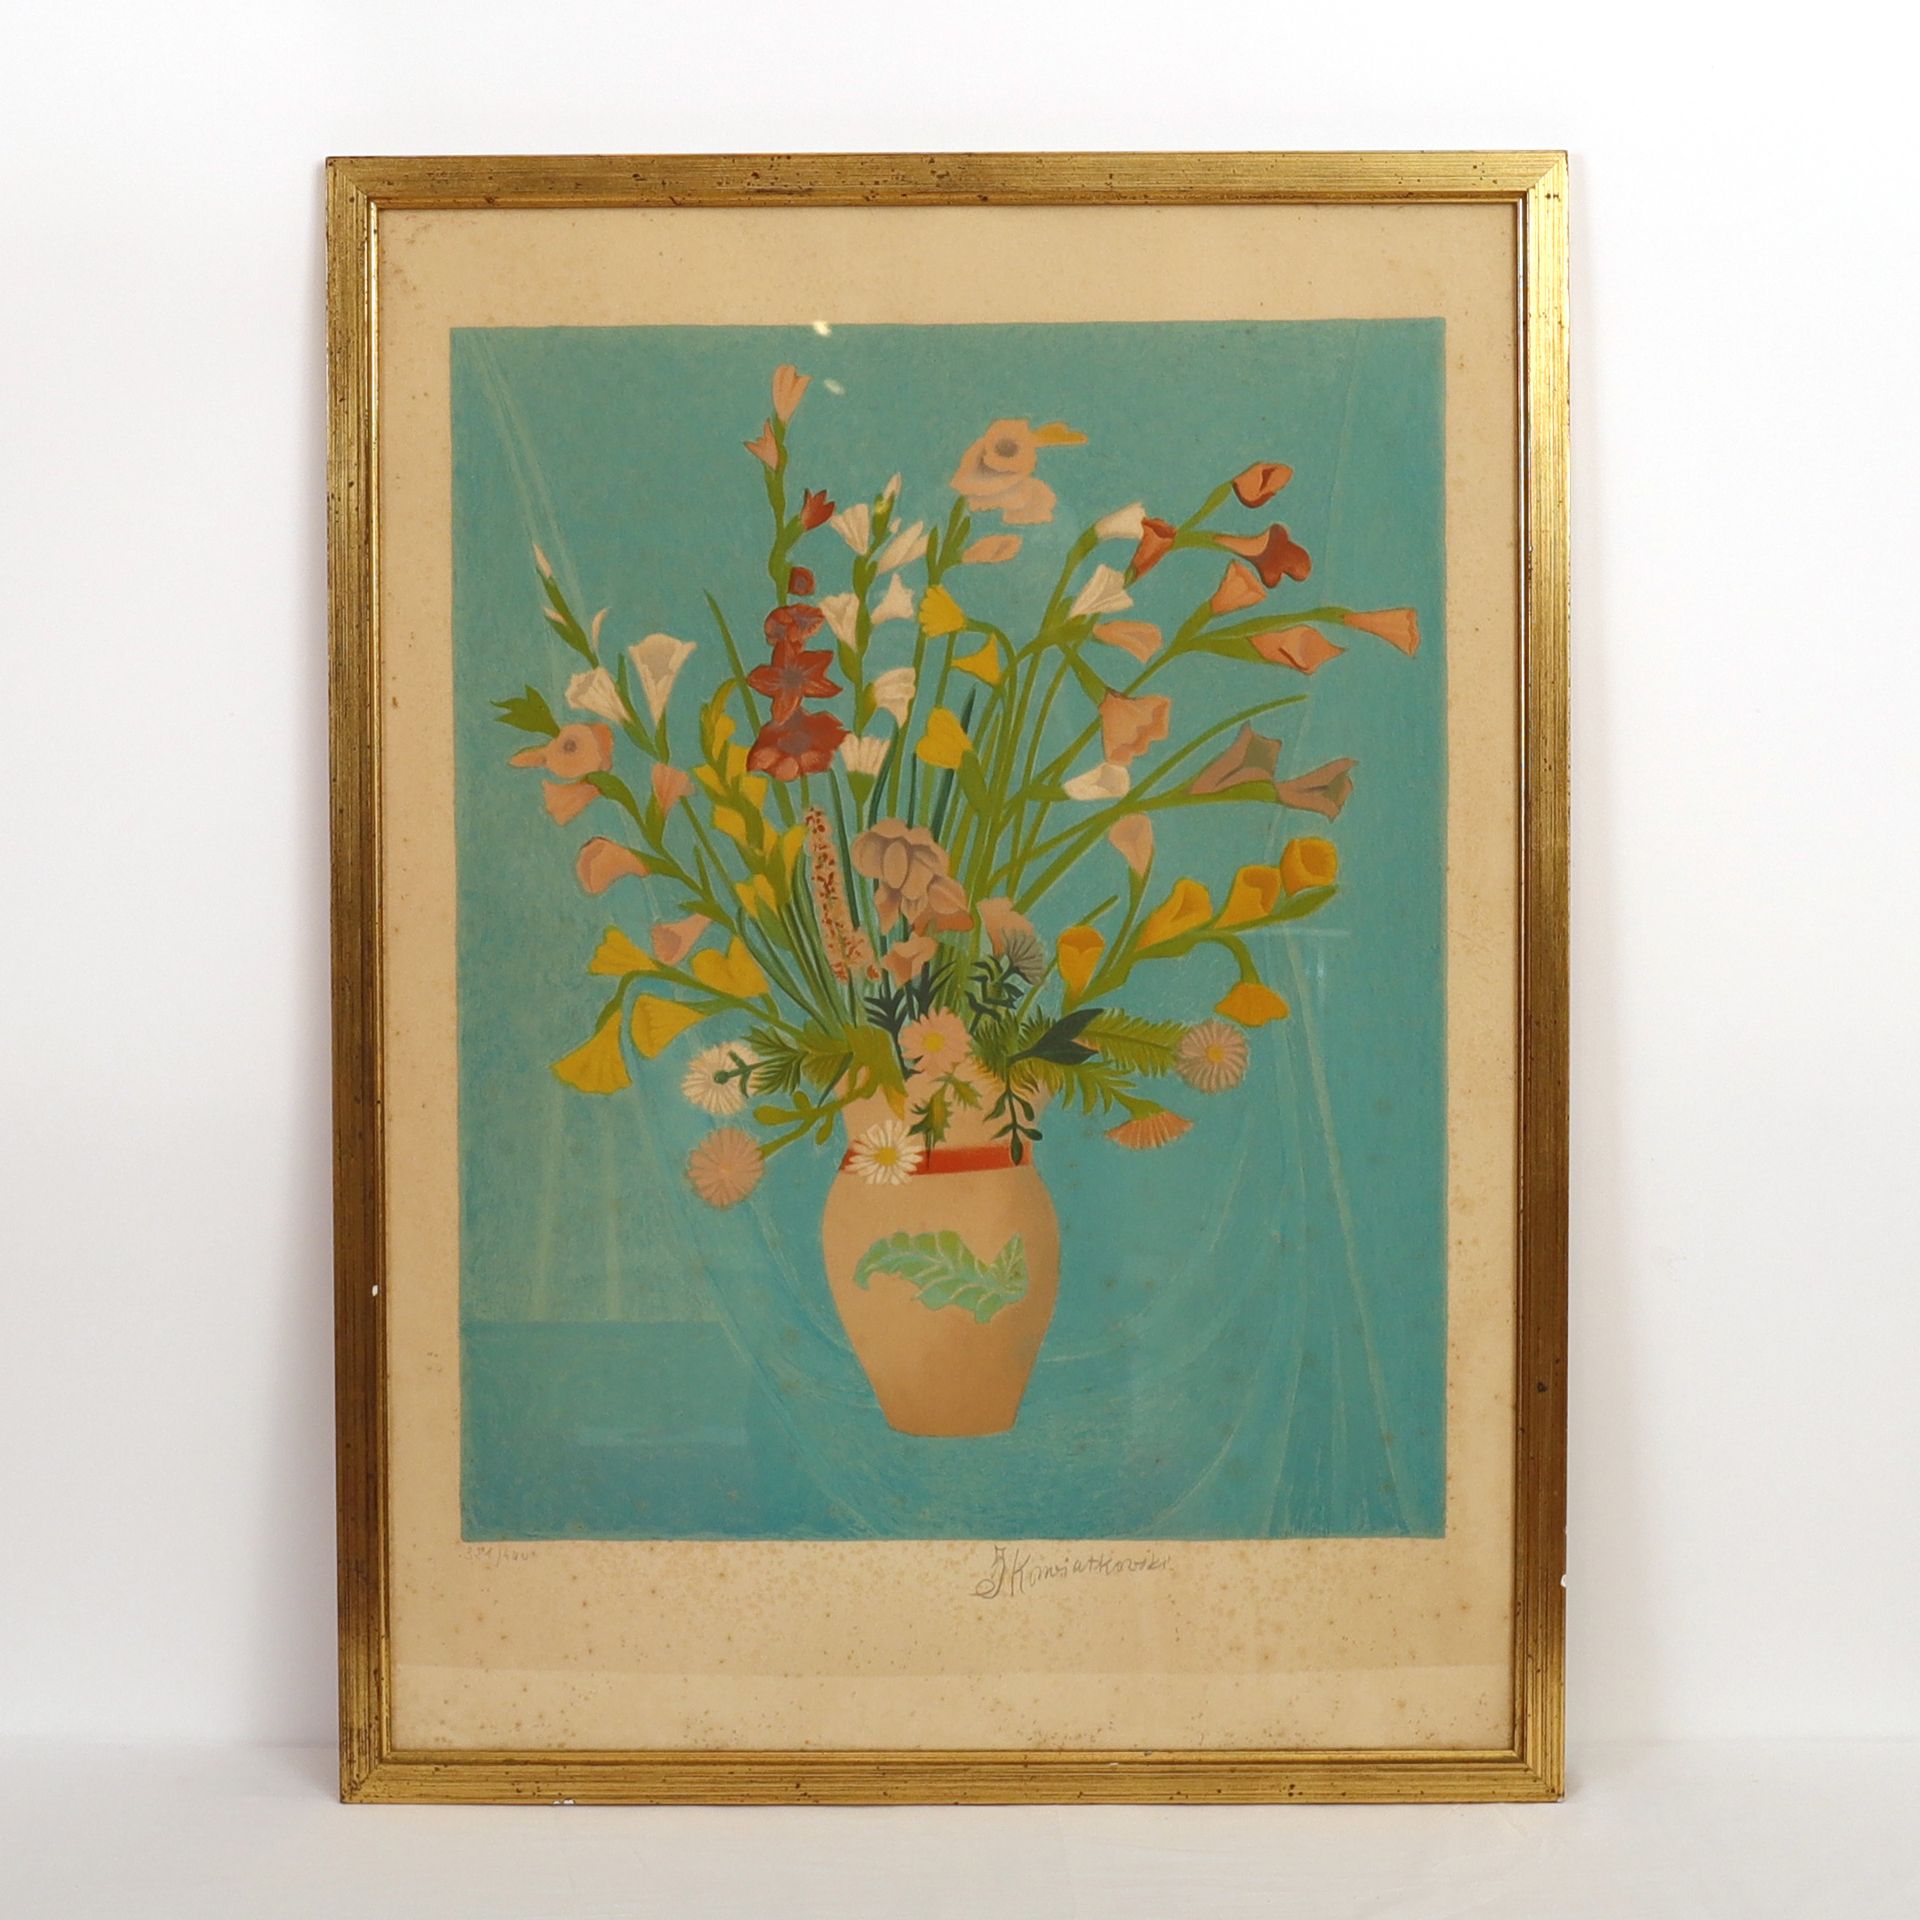 Null LITHOGRAPHY "FLOWERS" by Yann KWIATKOWSKI (born in 1888)

Signed at the bot&hellip;